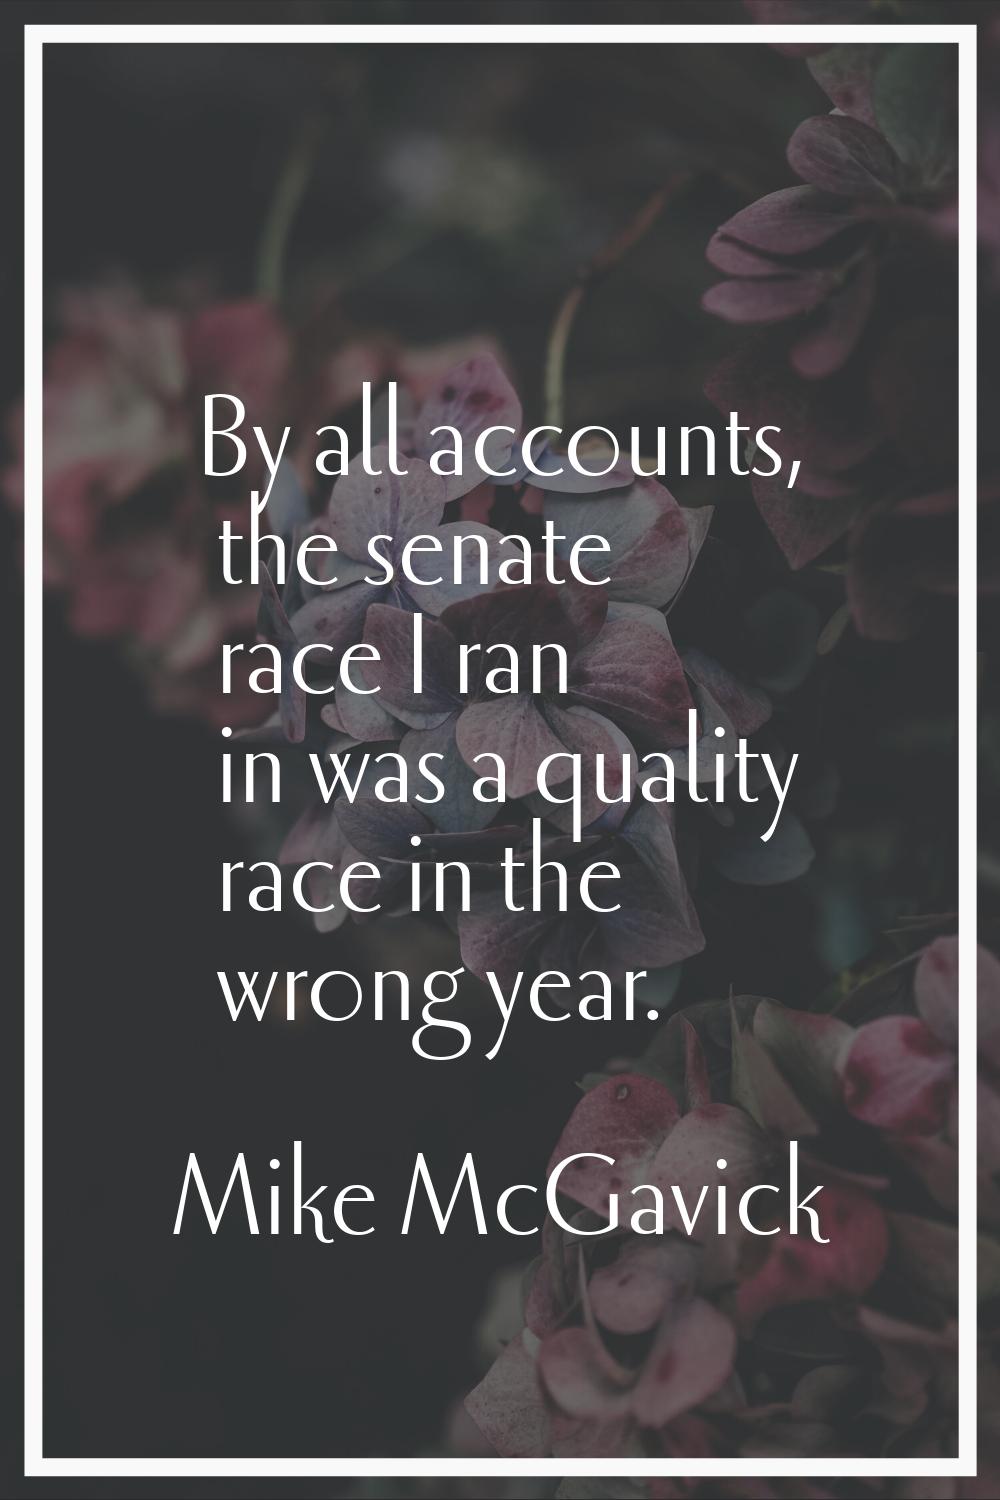 By all accounts, the senate race I ran in was a quality race in the wrong year.